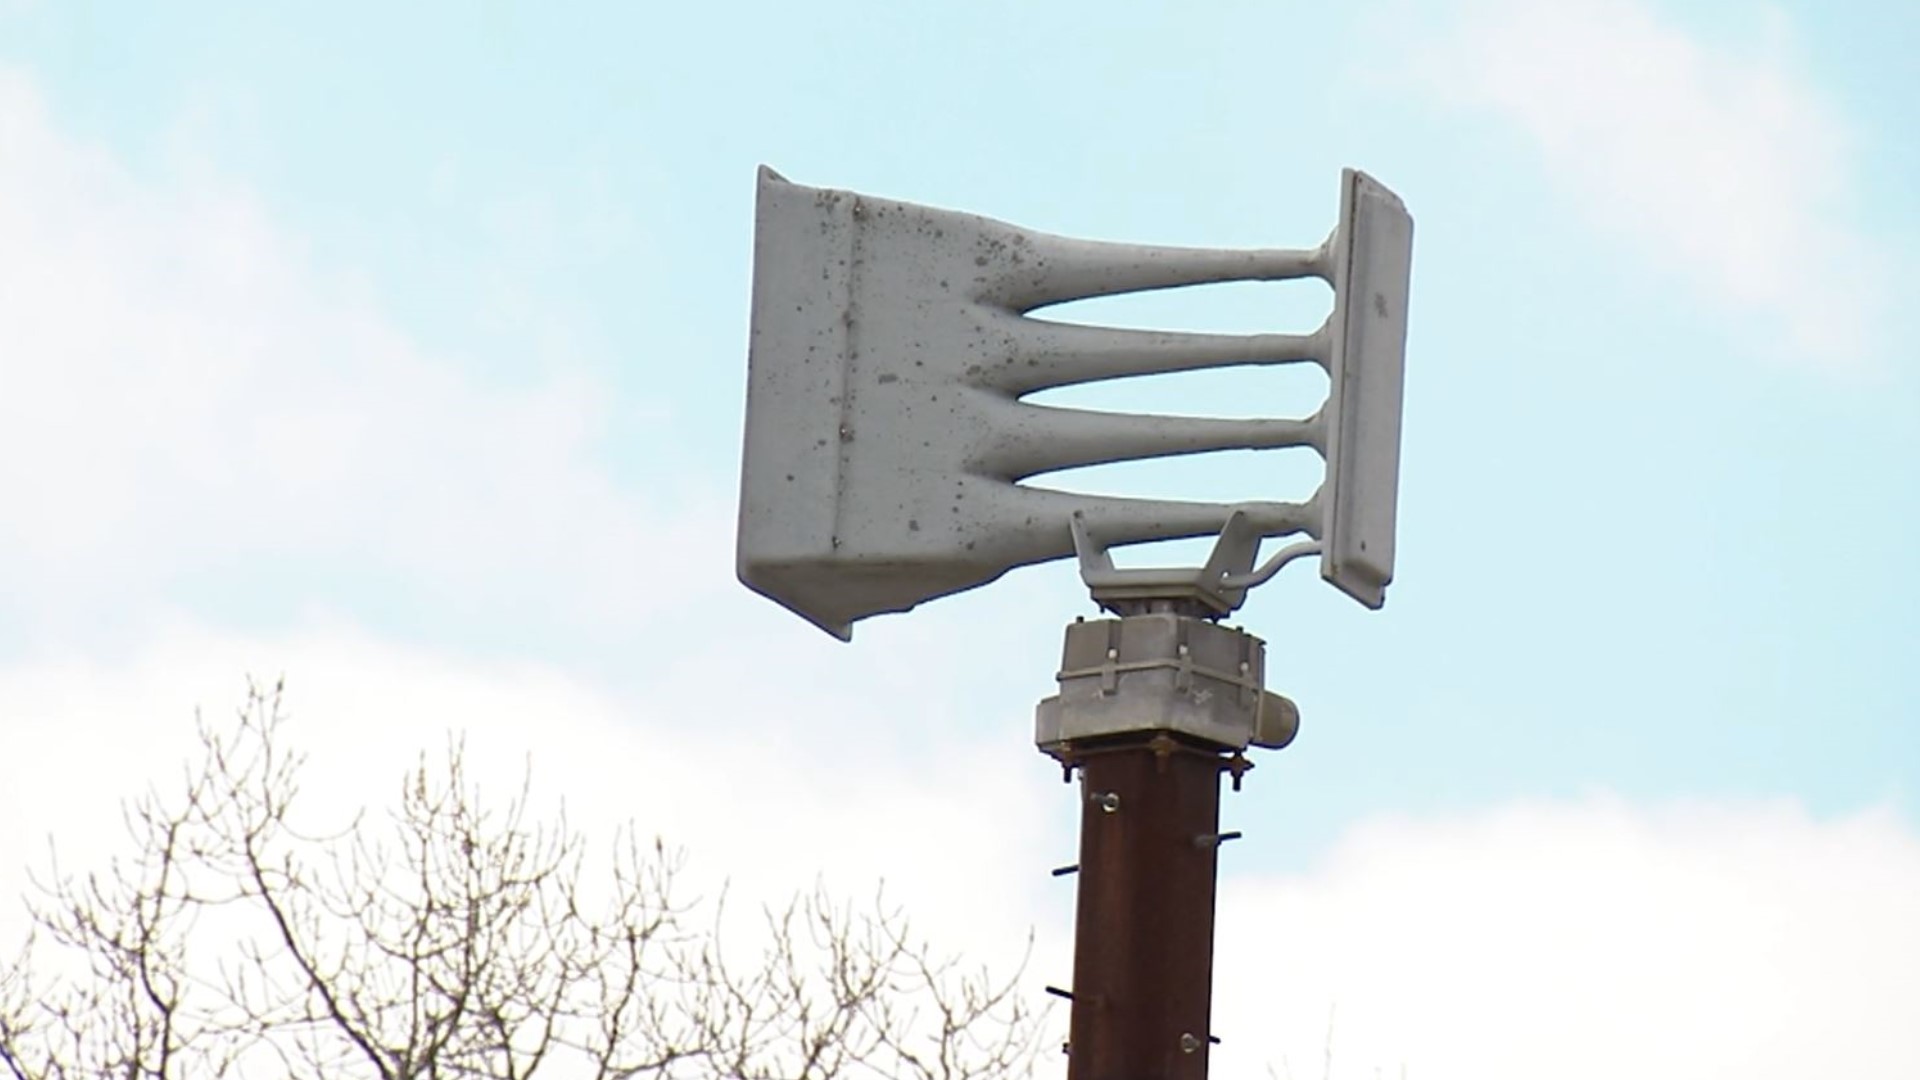 There are 196 tornado sirens spread across Franklin County and while they didn't go off as normal at noon today, EMA says they are all working and ready to go.